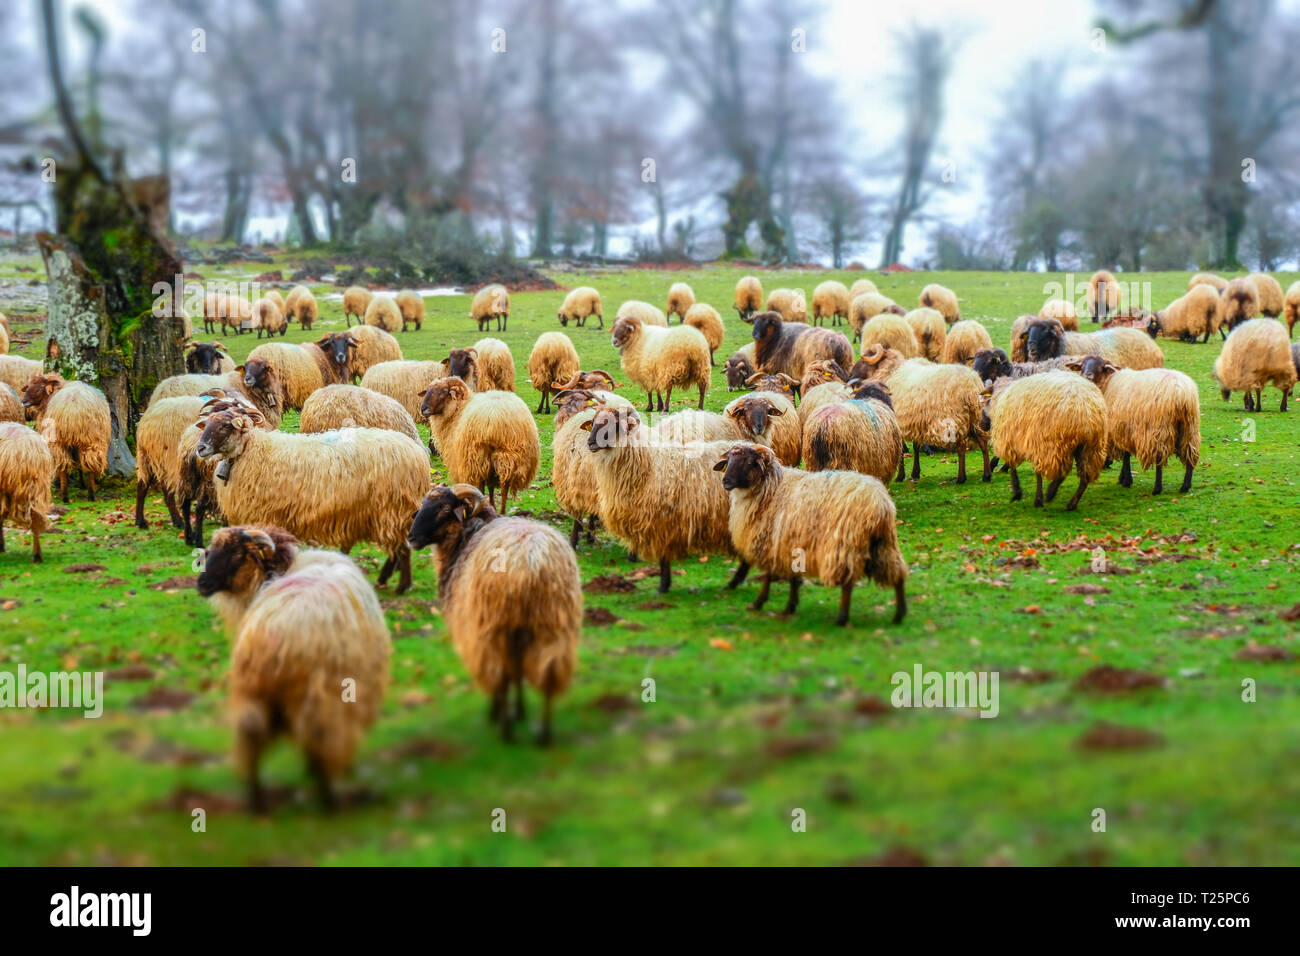 Flock of sheep in a grassland. Stock Photo